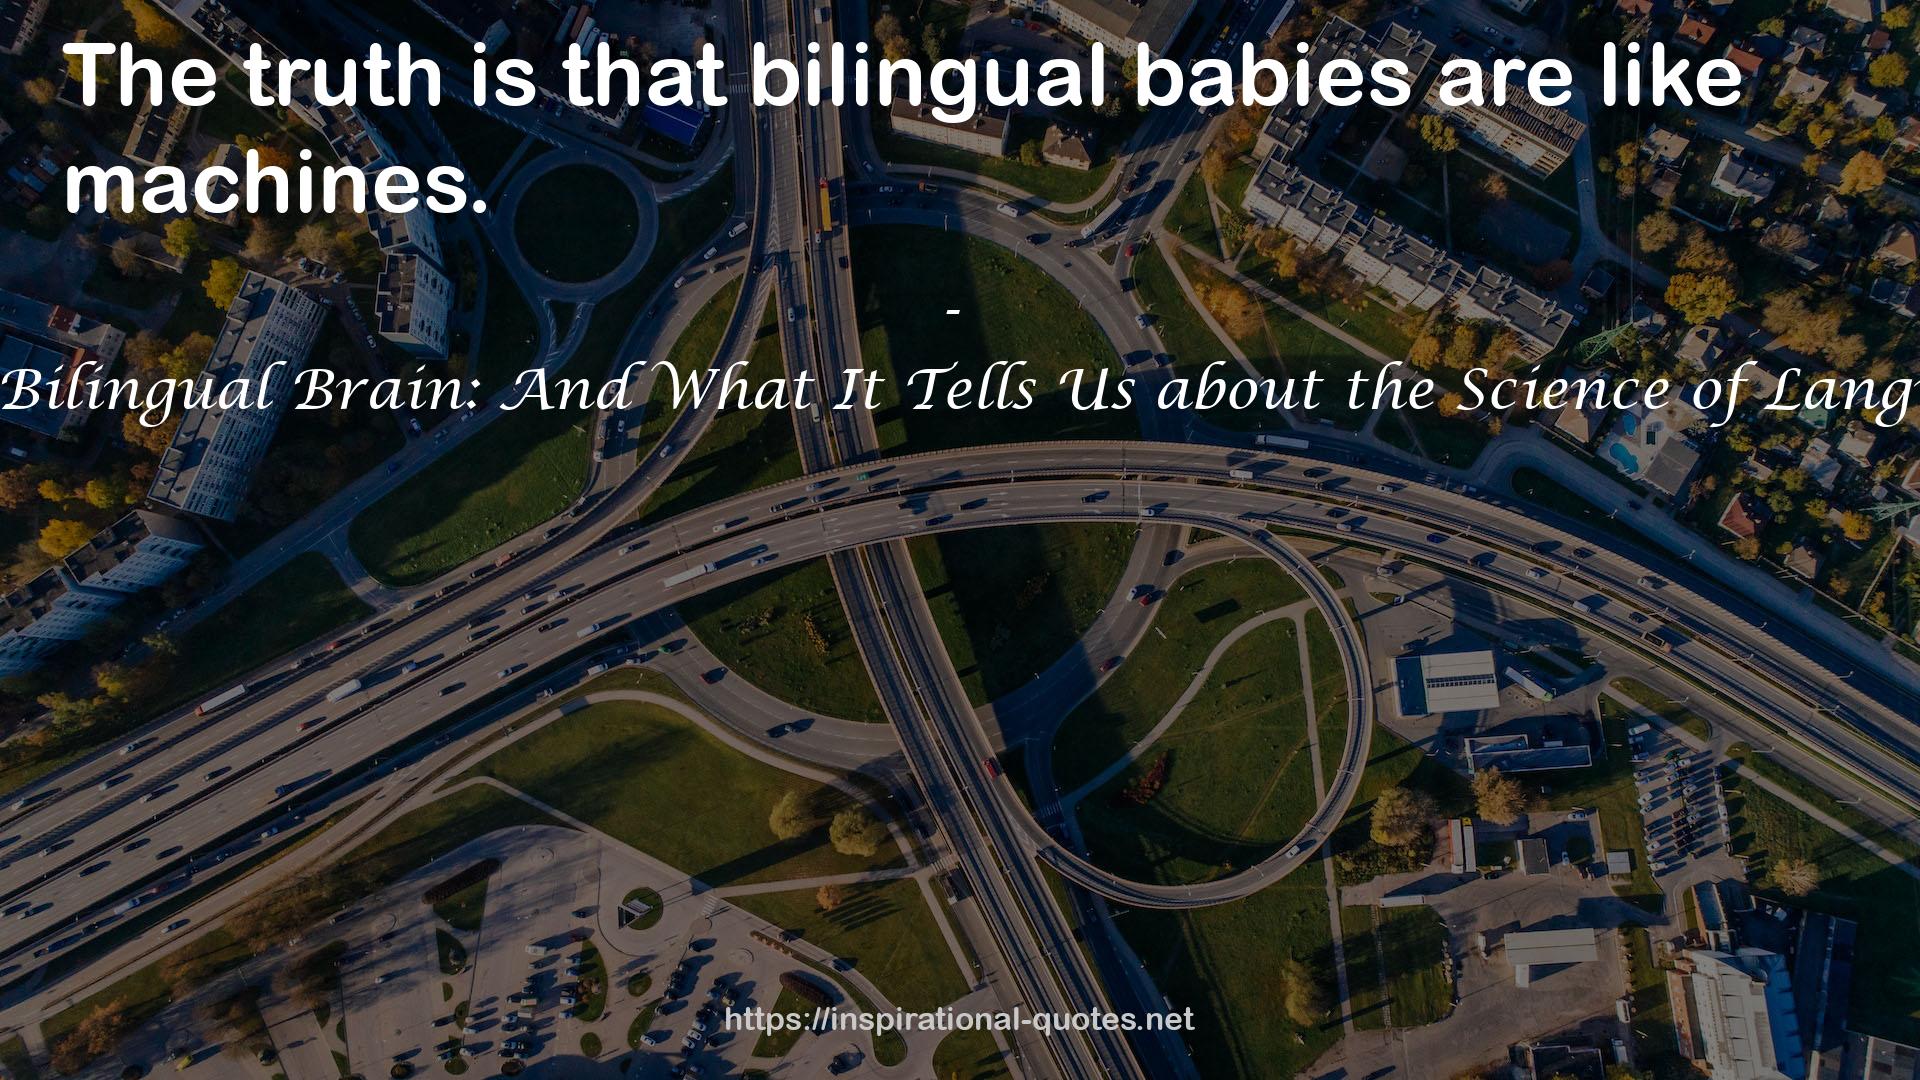 The Bilingual Brain: And What It Tells Us about the Science of Language QUOTES